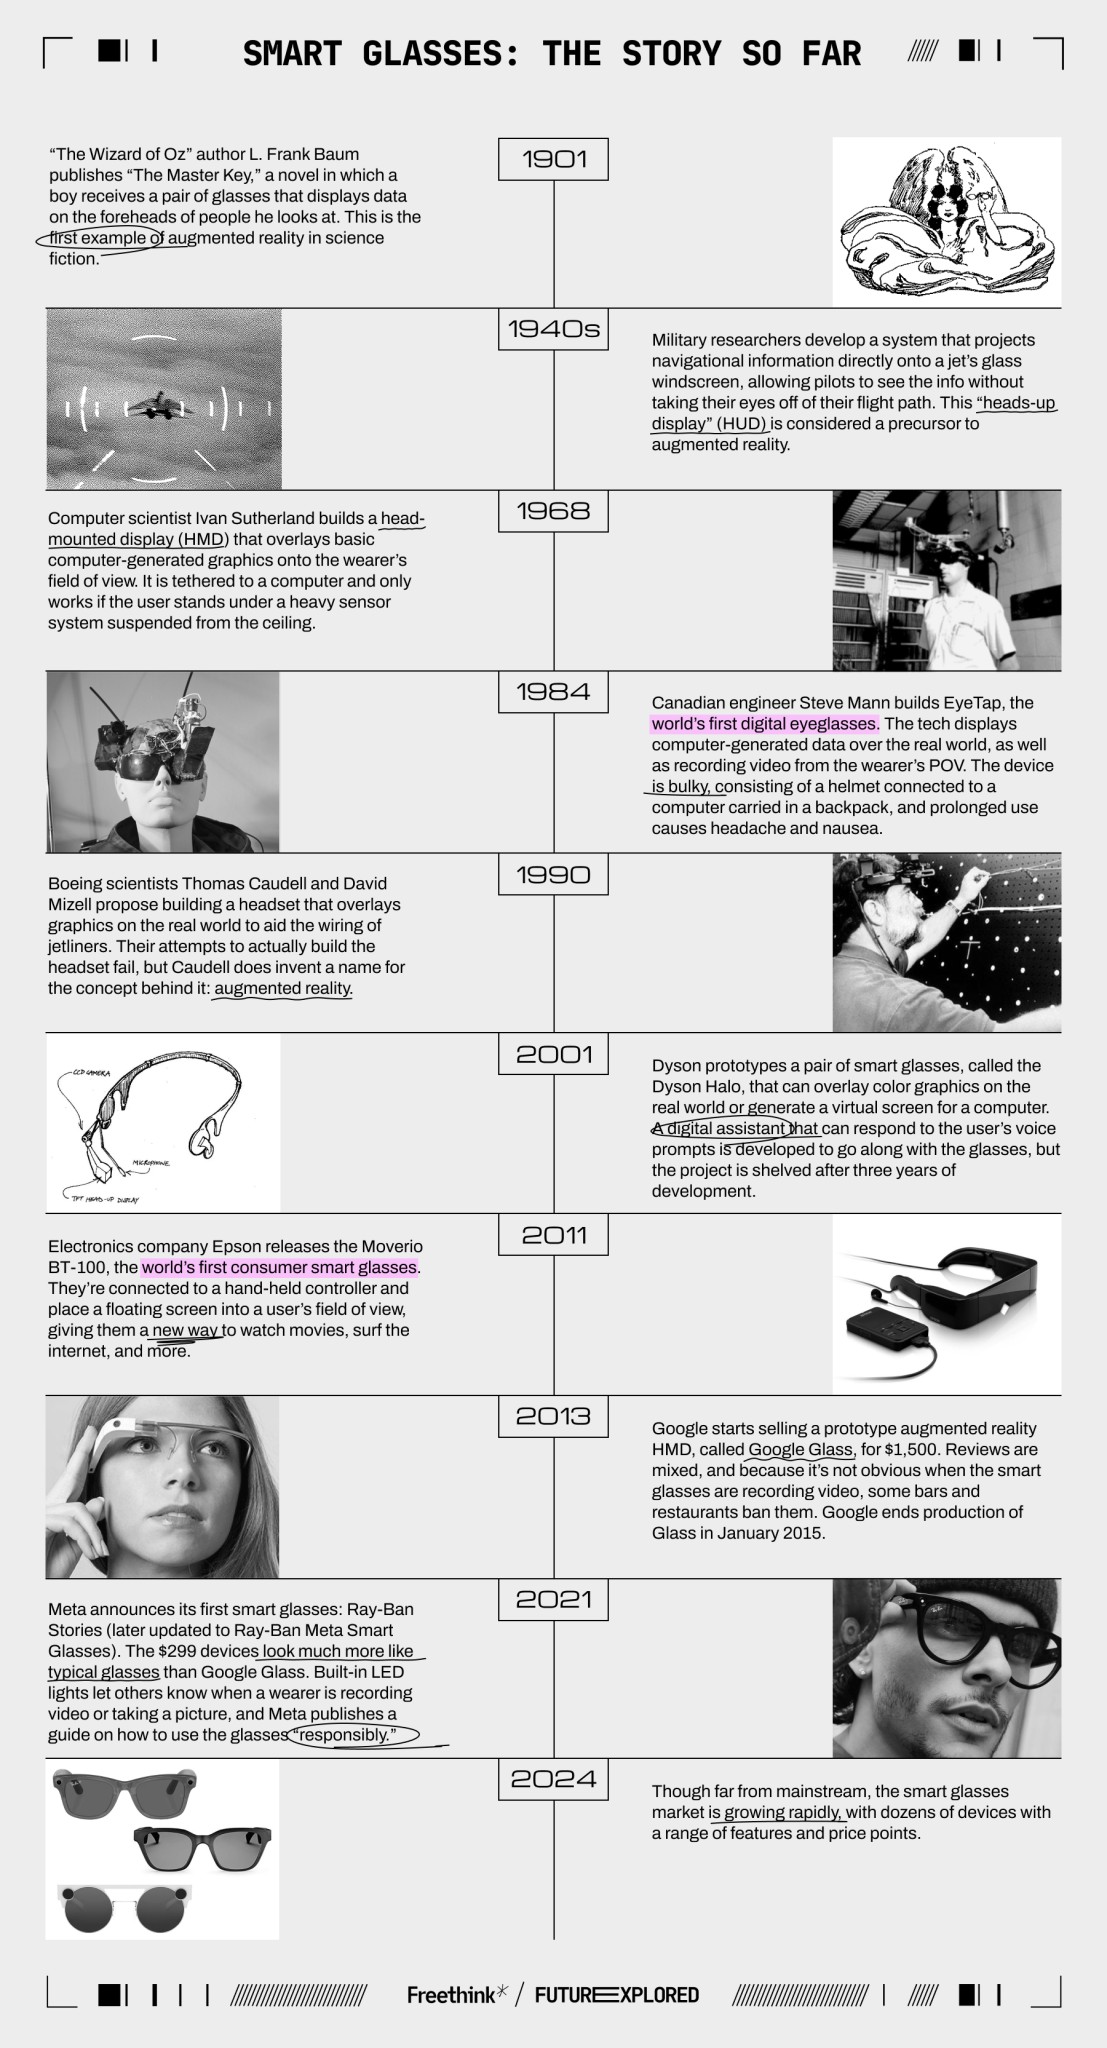 Timeline infographic detailing the history and evolution of smart glasses from 1901 to 2024, highlighting significant developments and prototypes introduced by various inventors and companies.